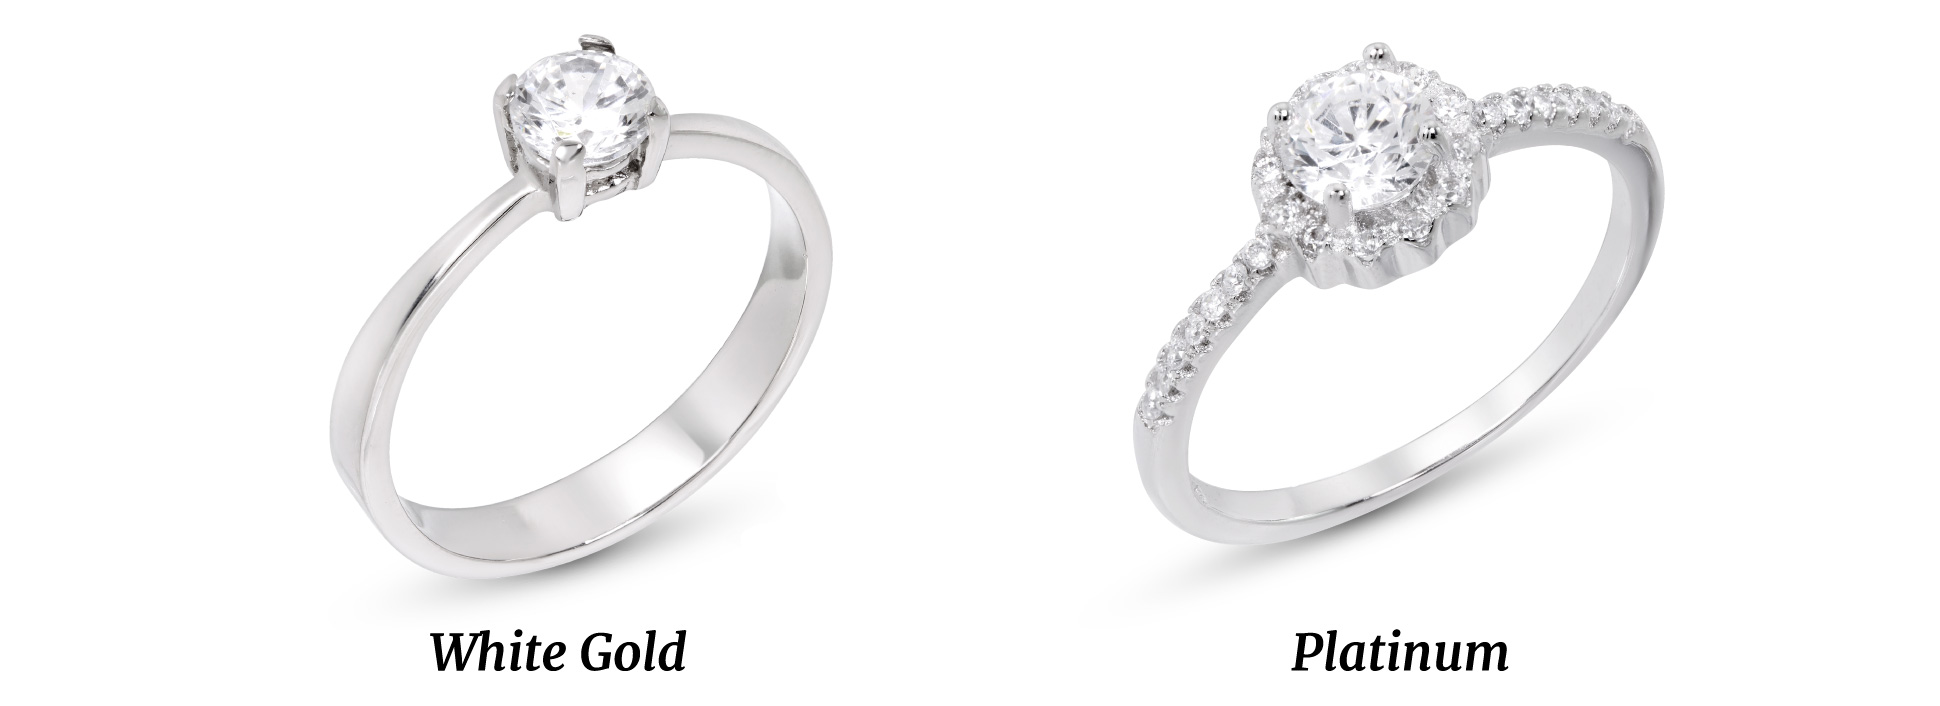 Platinum vs White Gold: Which Metal is Best For My Ring?